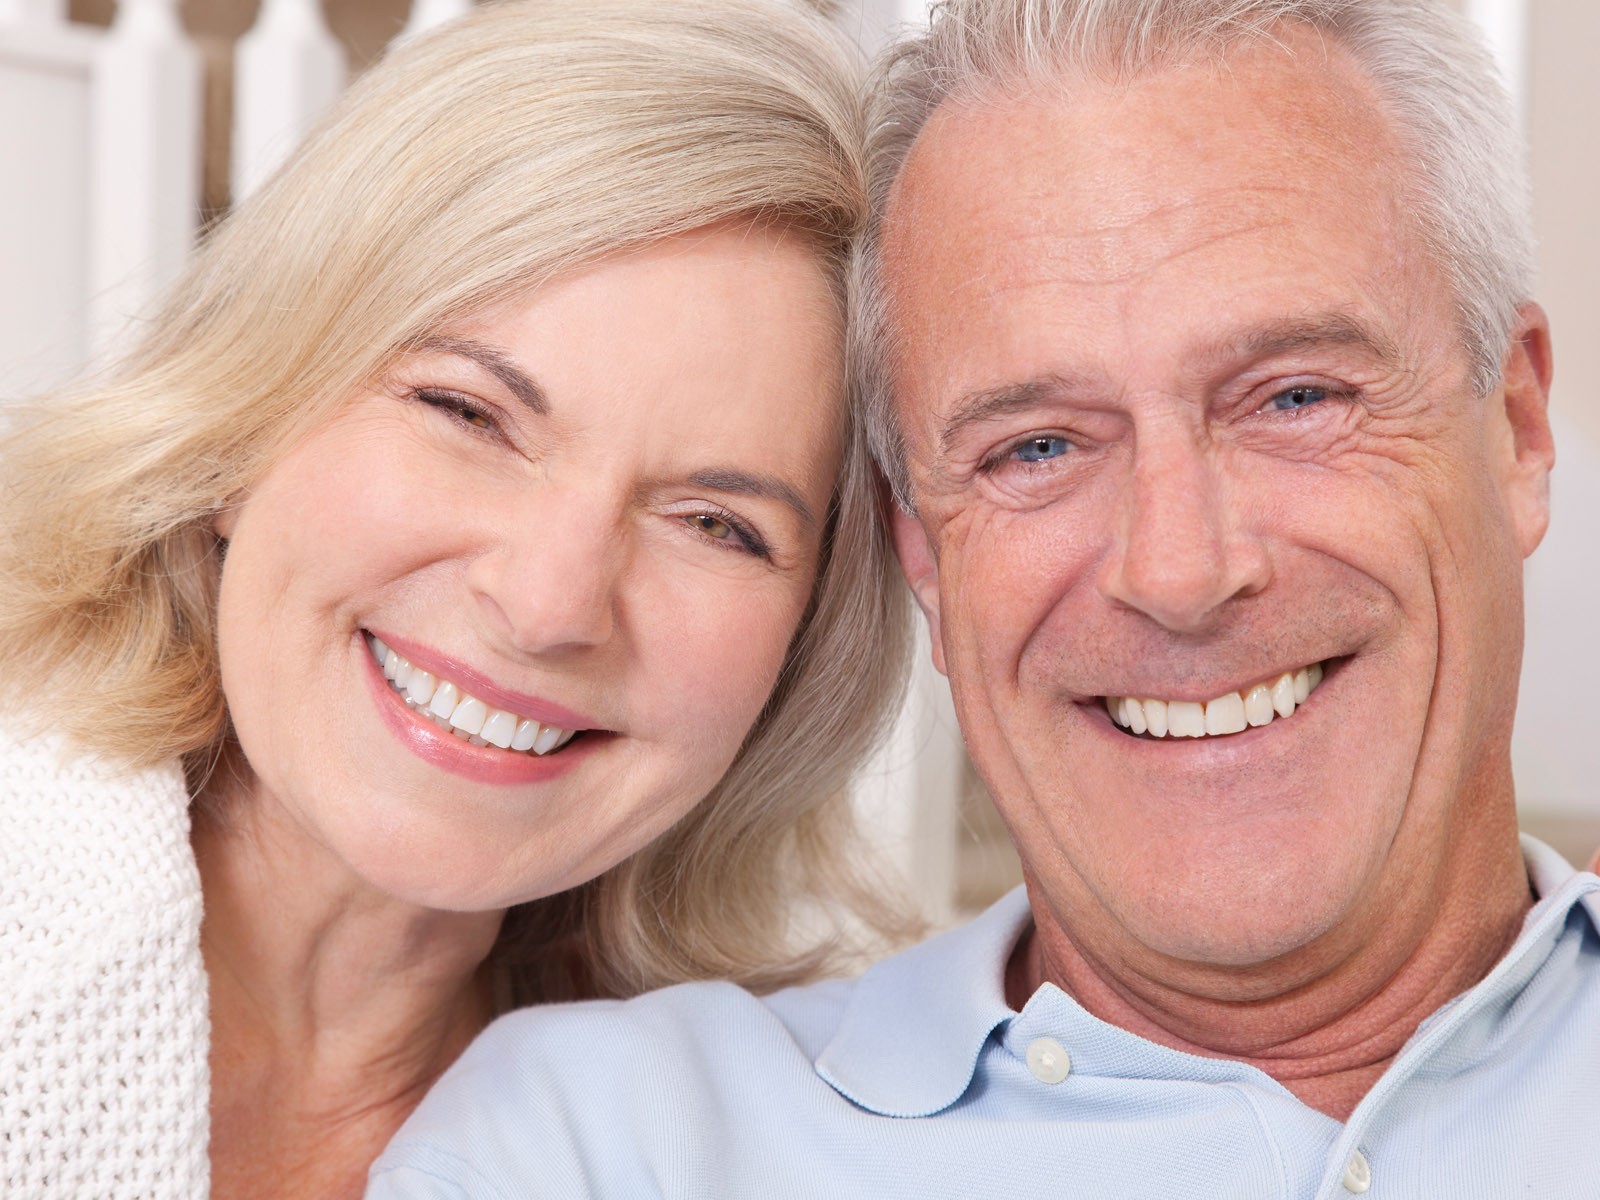 What are the Interim Prosthesis Options for Dental Implants?